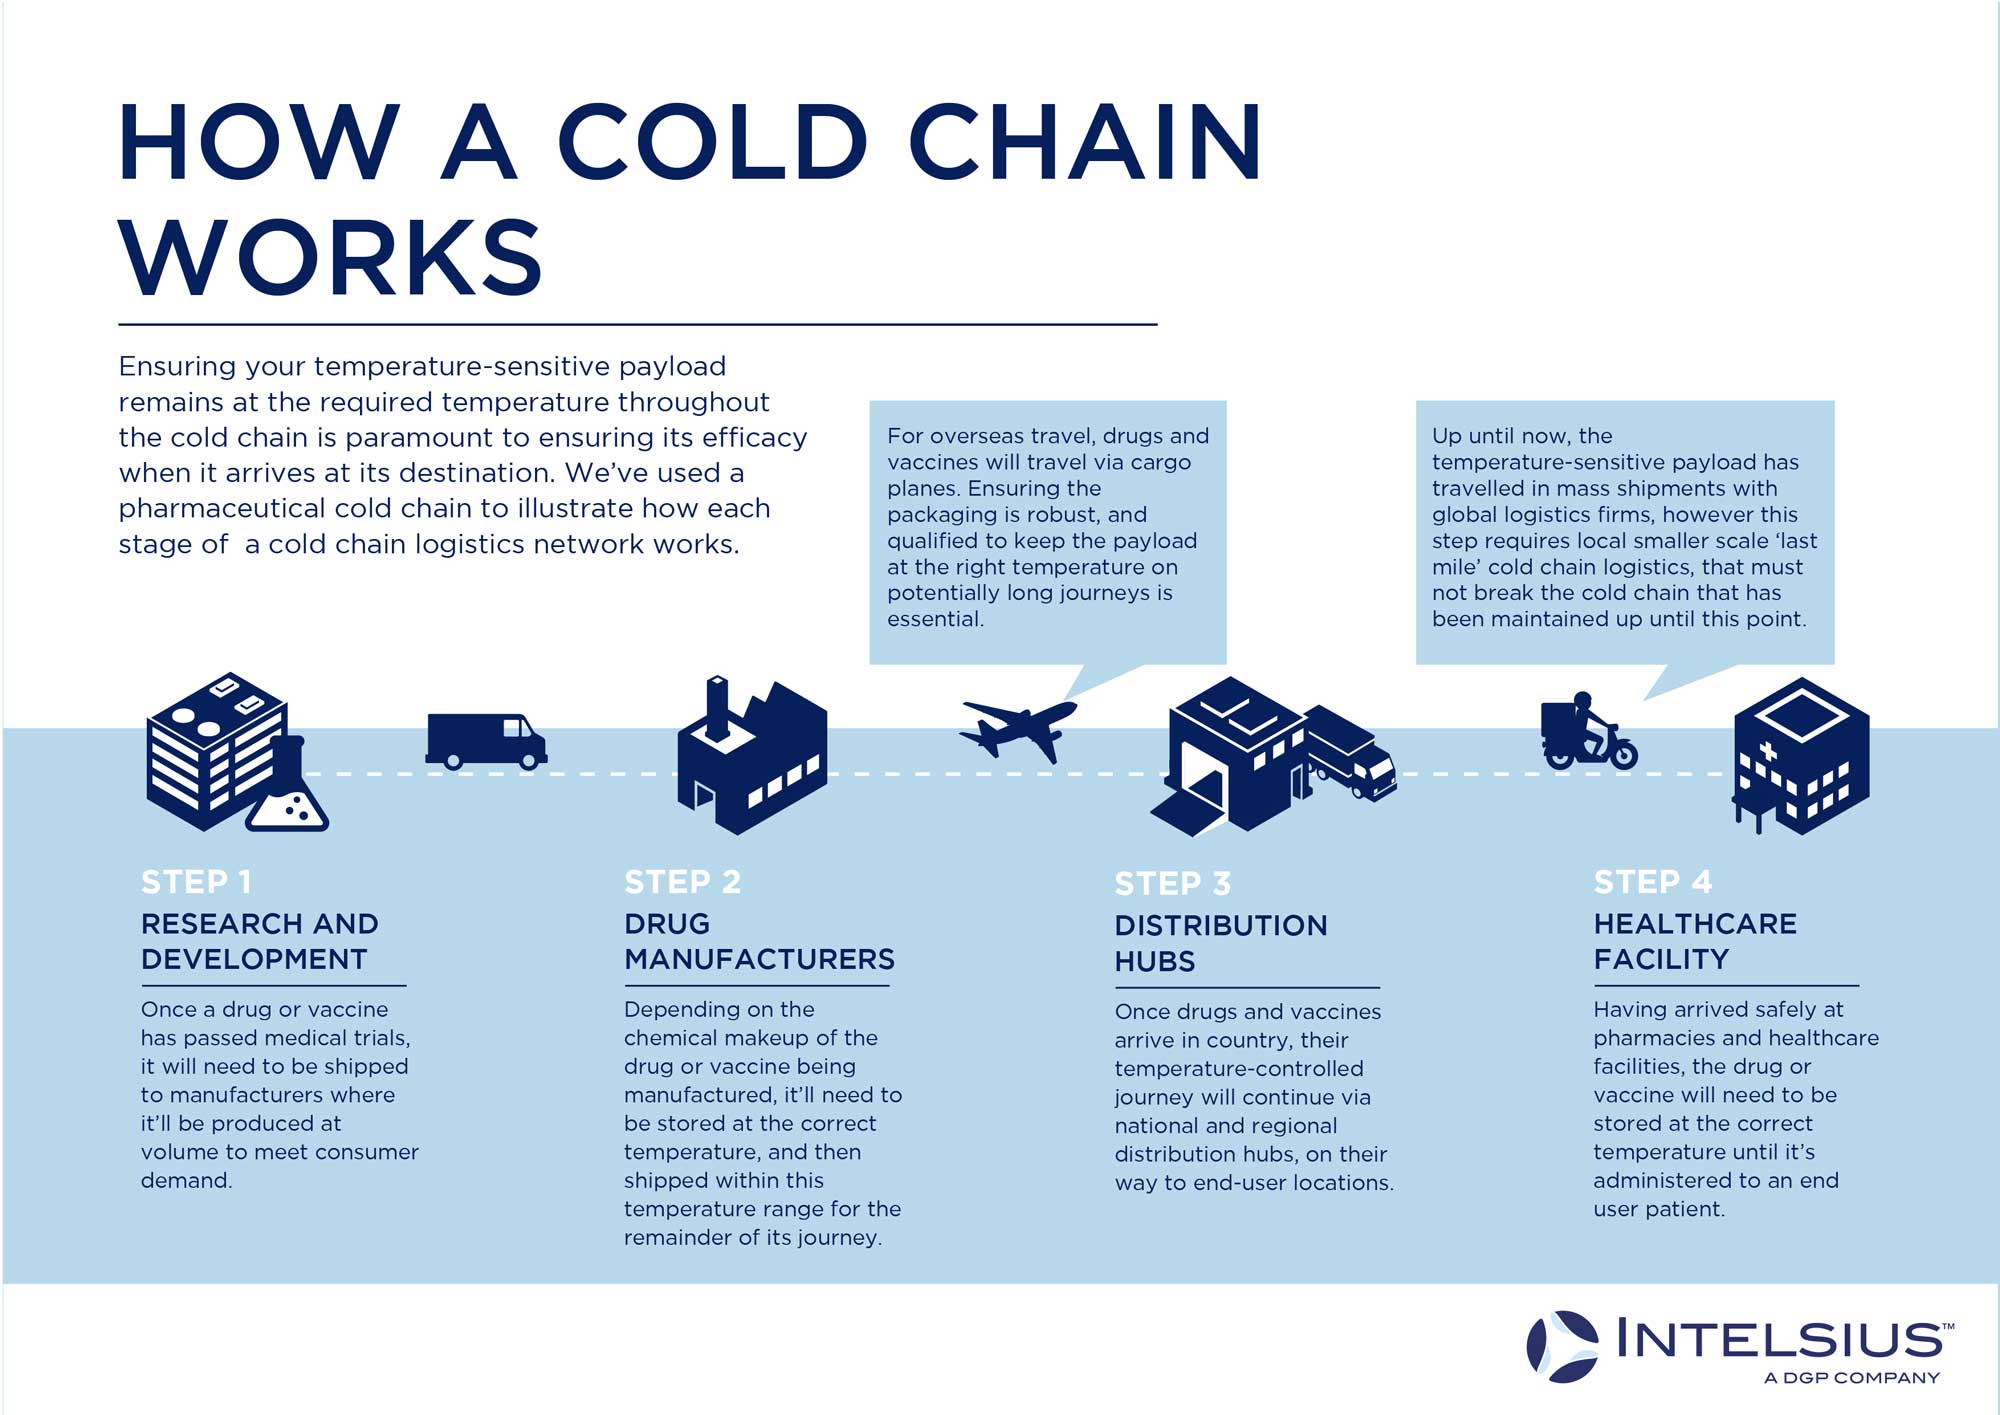 Graphic Showing how a Cold Chain Works transported from Research and development to healthcare facility